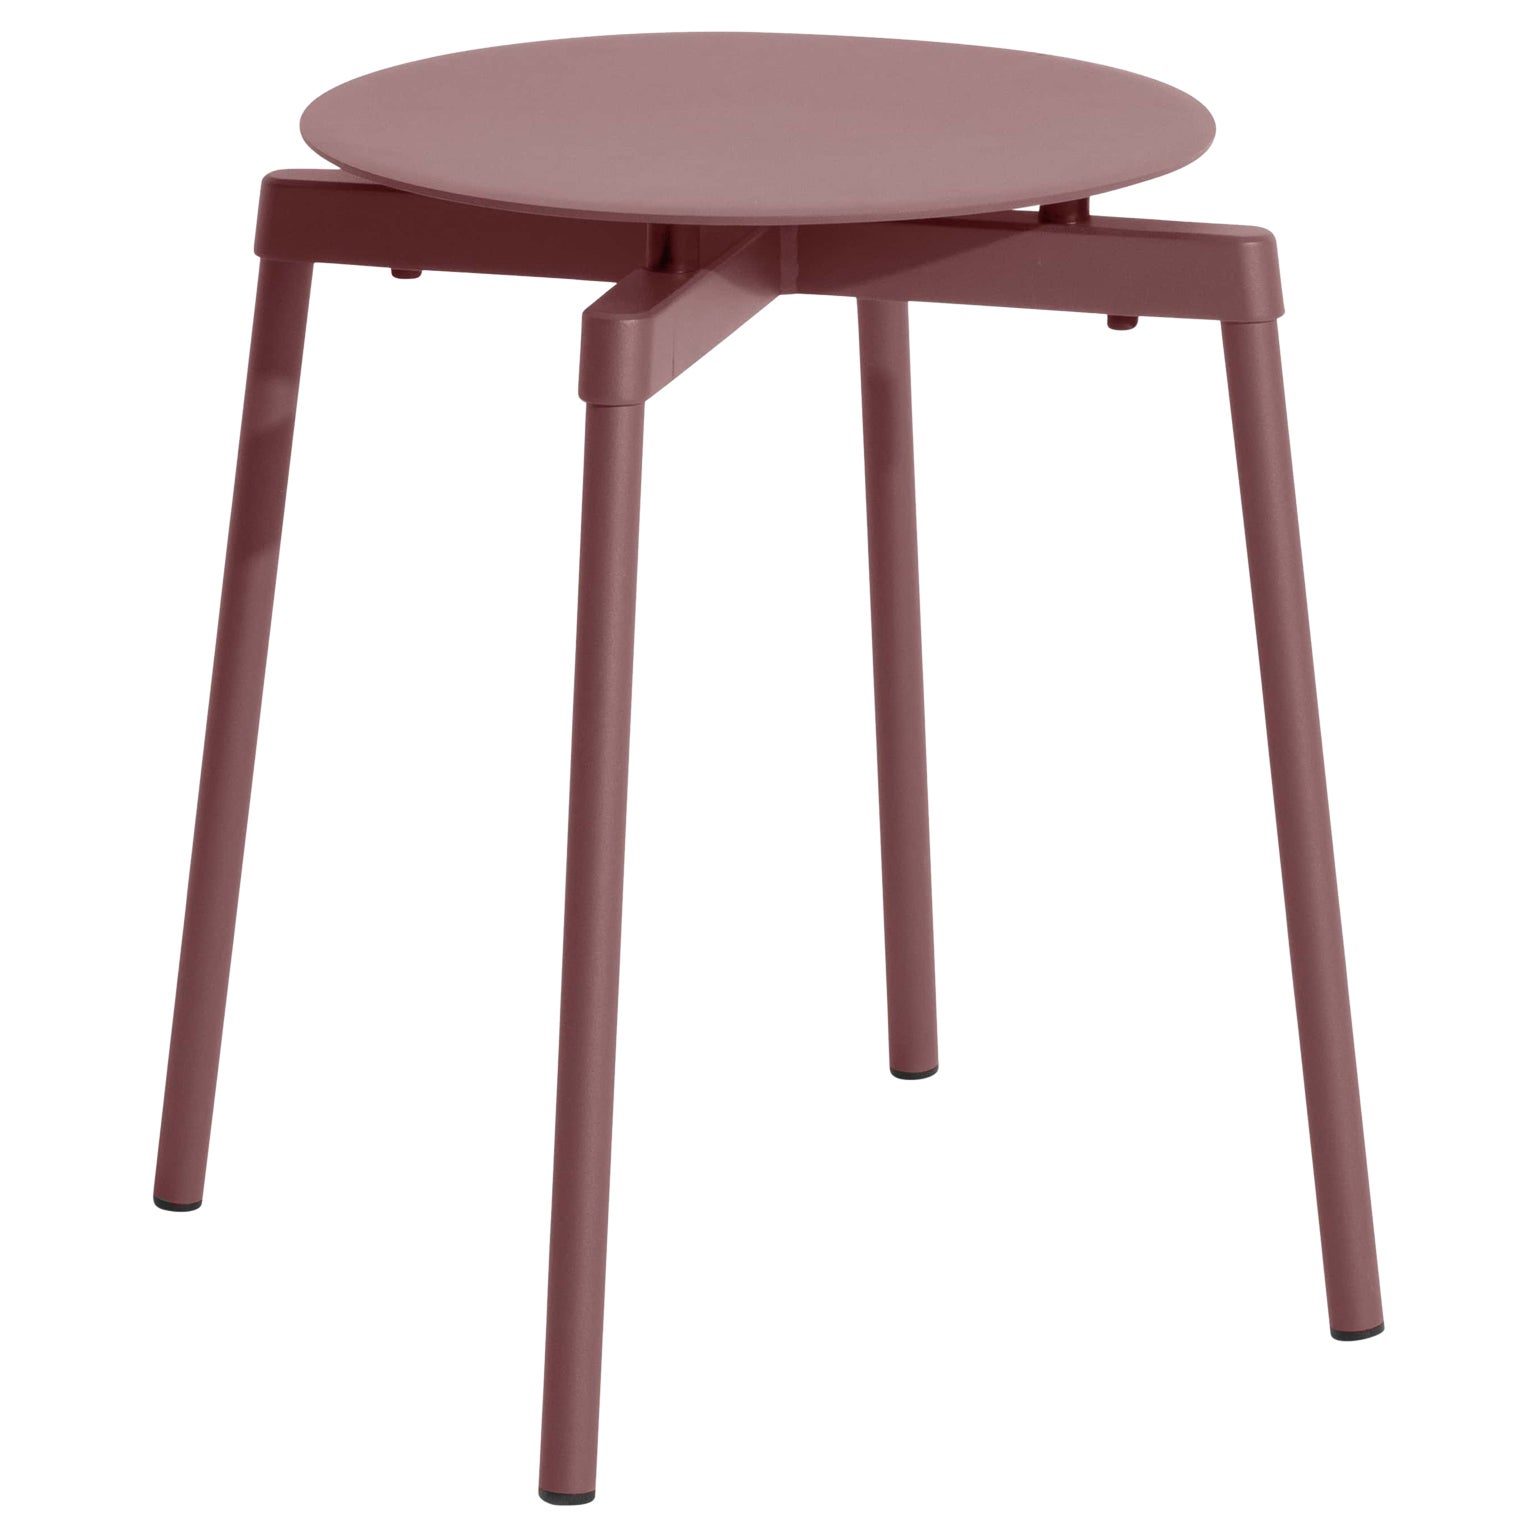 Petite Friture Fromme Stool in Brown-Red Aluminium by Tom Chung, 2020